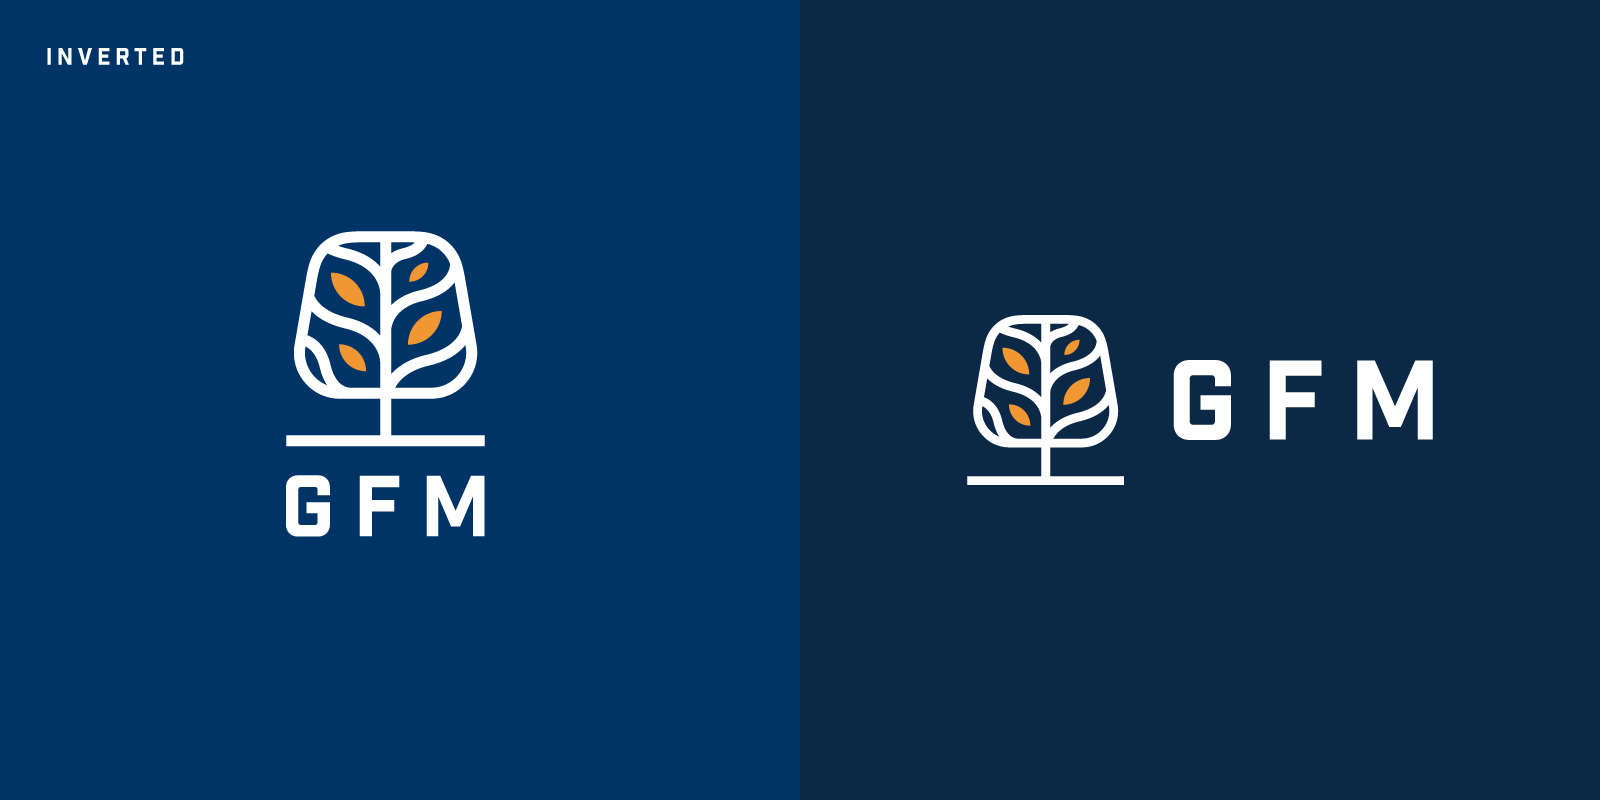 Goodwin Family Management logo on blue backgrounds